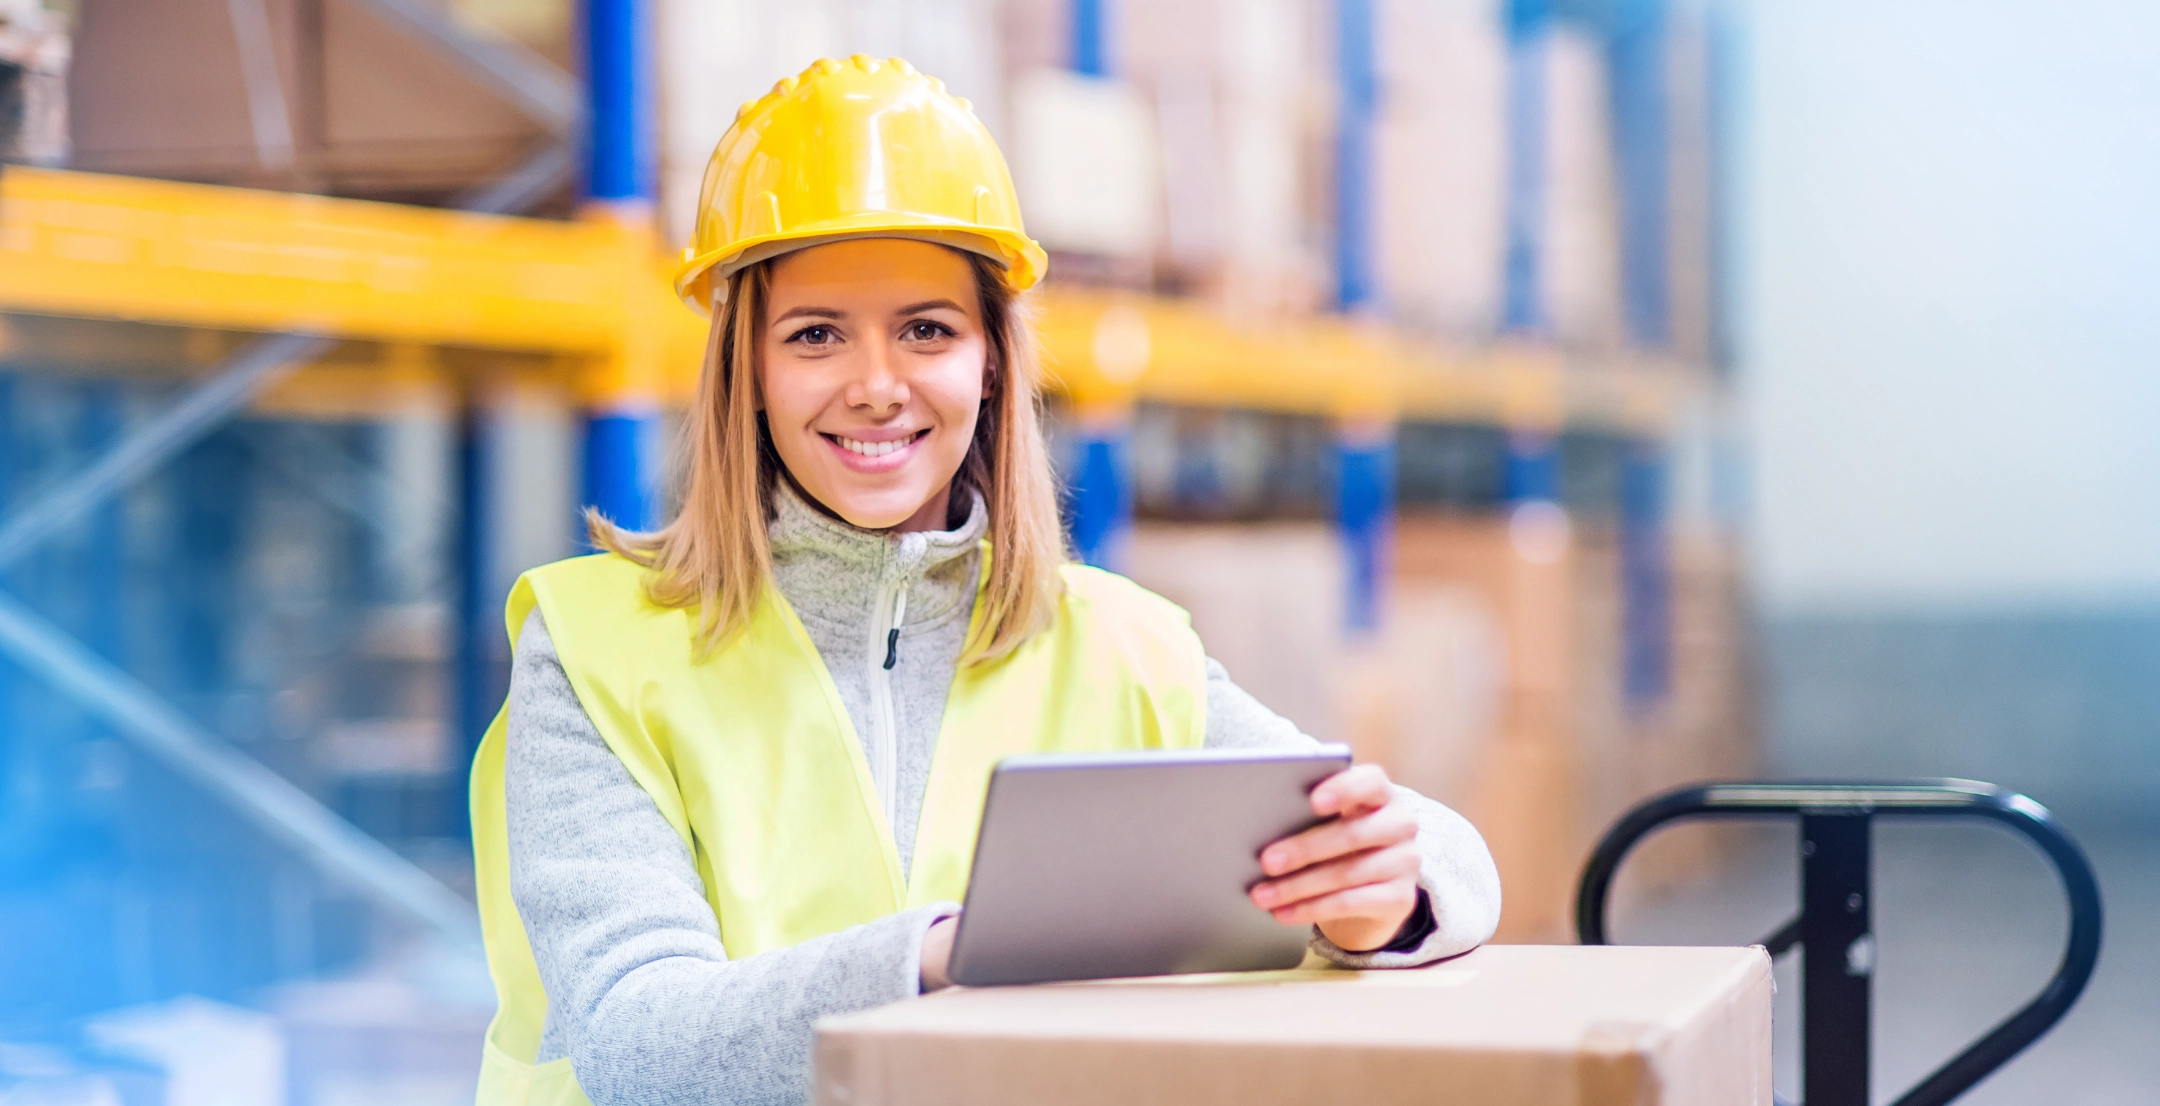 Logistics worker in warehouse smiling while using tablet.